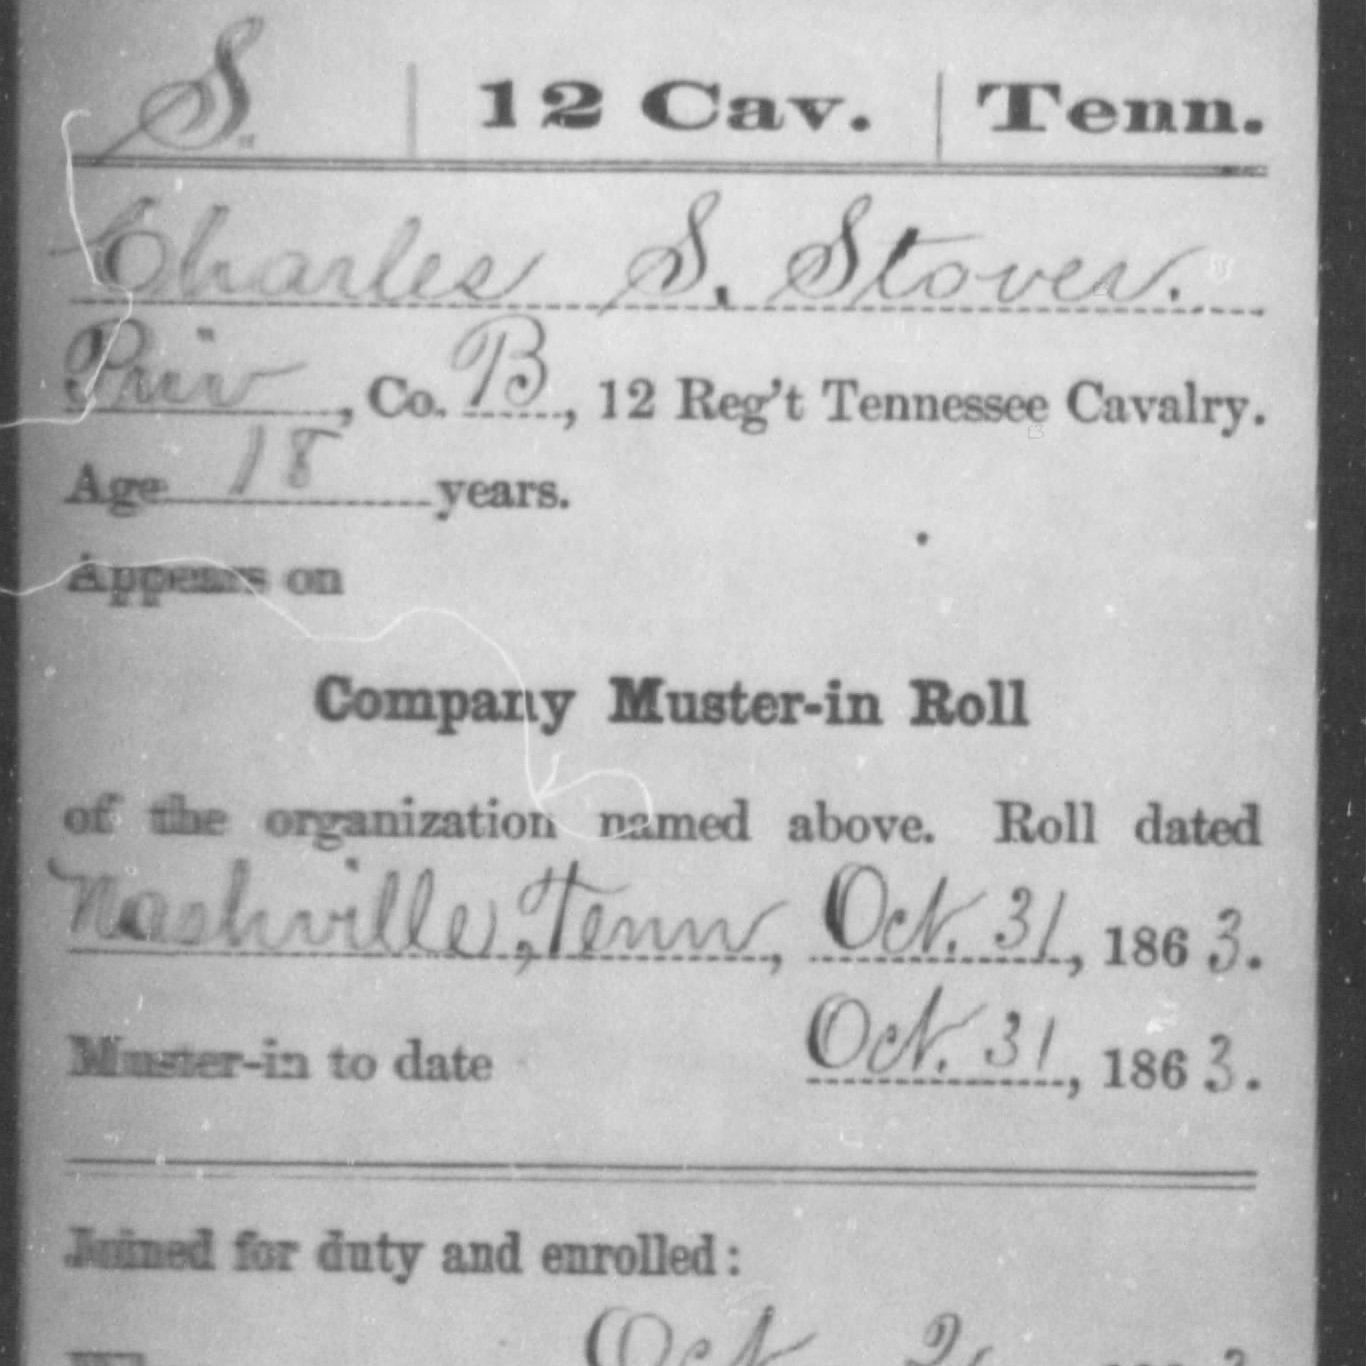 Pvt. Charles Stover, Co. B, 12th TN Cavalry, USA